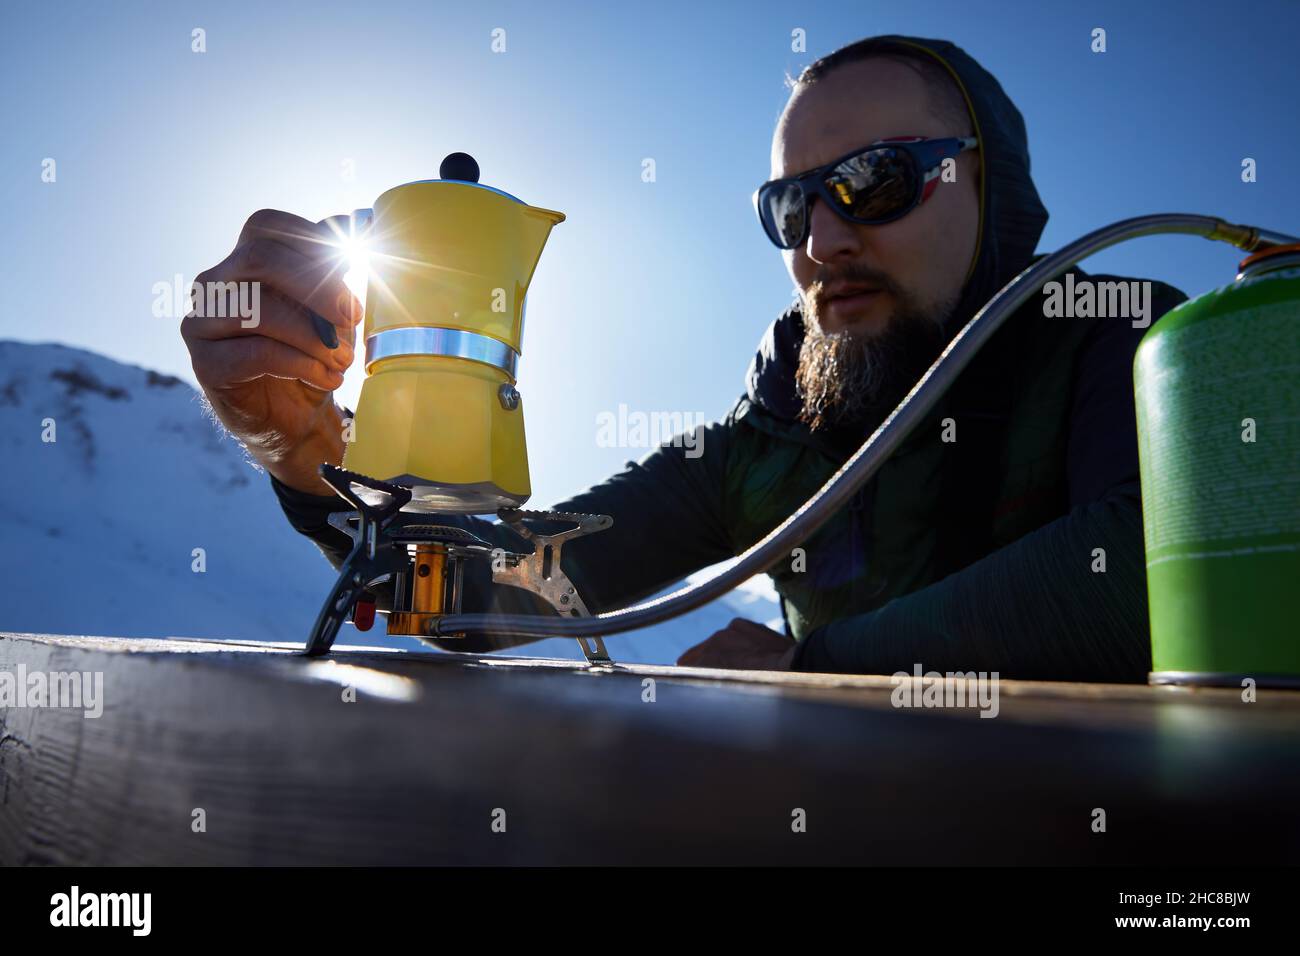 Bearded man hiker making coffee from Yellow Moka mocha pot on gas stove outdoors in the snow winter mountains. Old style coffee vintage pot outdoor ca Stock Photo